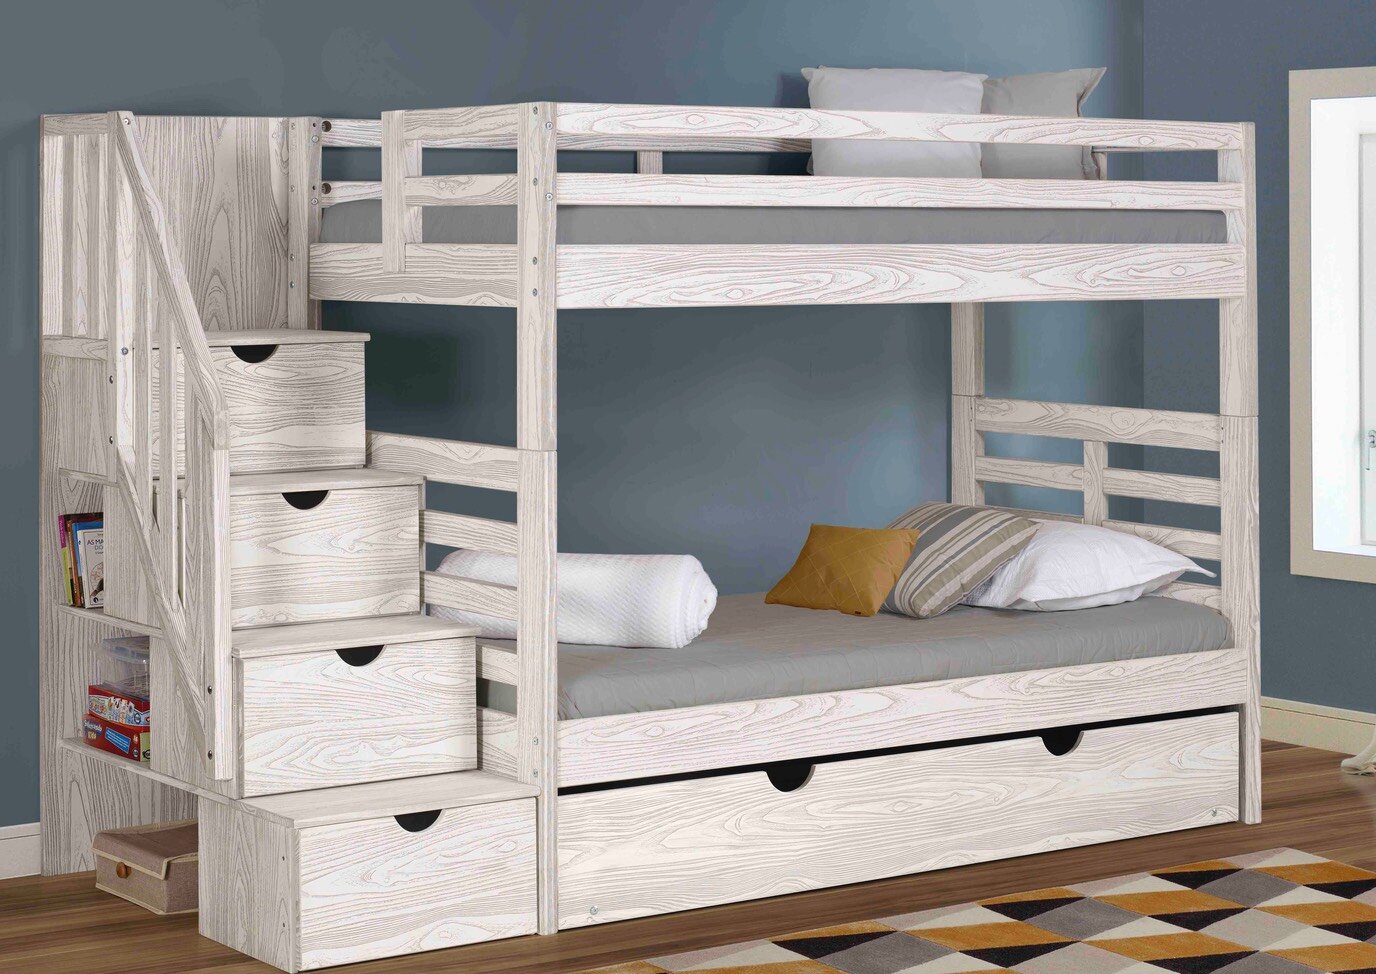 Solid Wood Bunk Bed With Staircase, Shyann Twin Over Full Bunk Bed With Trundle